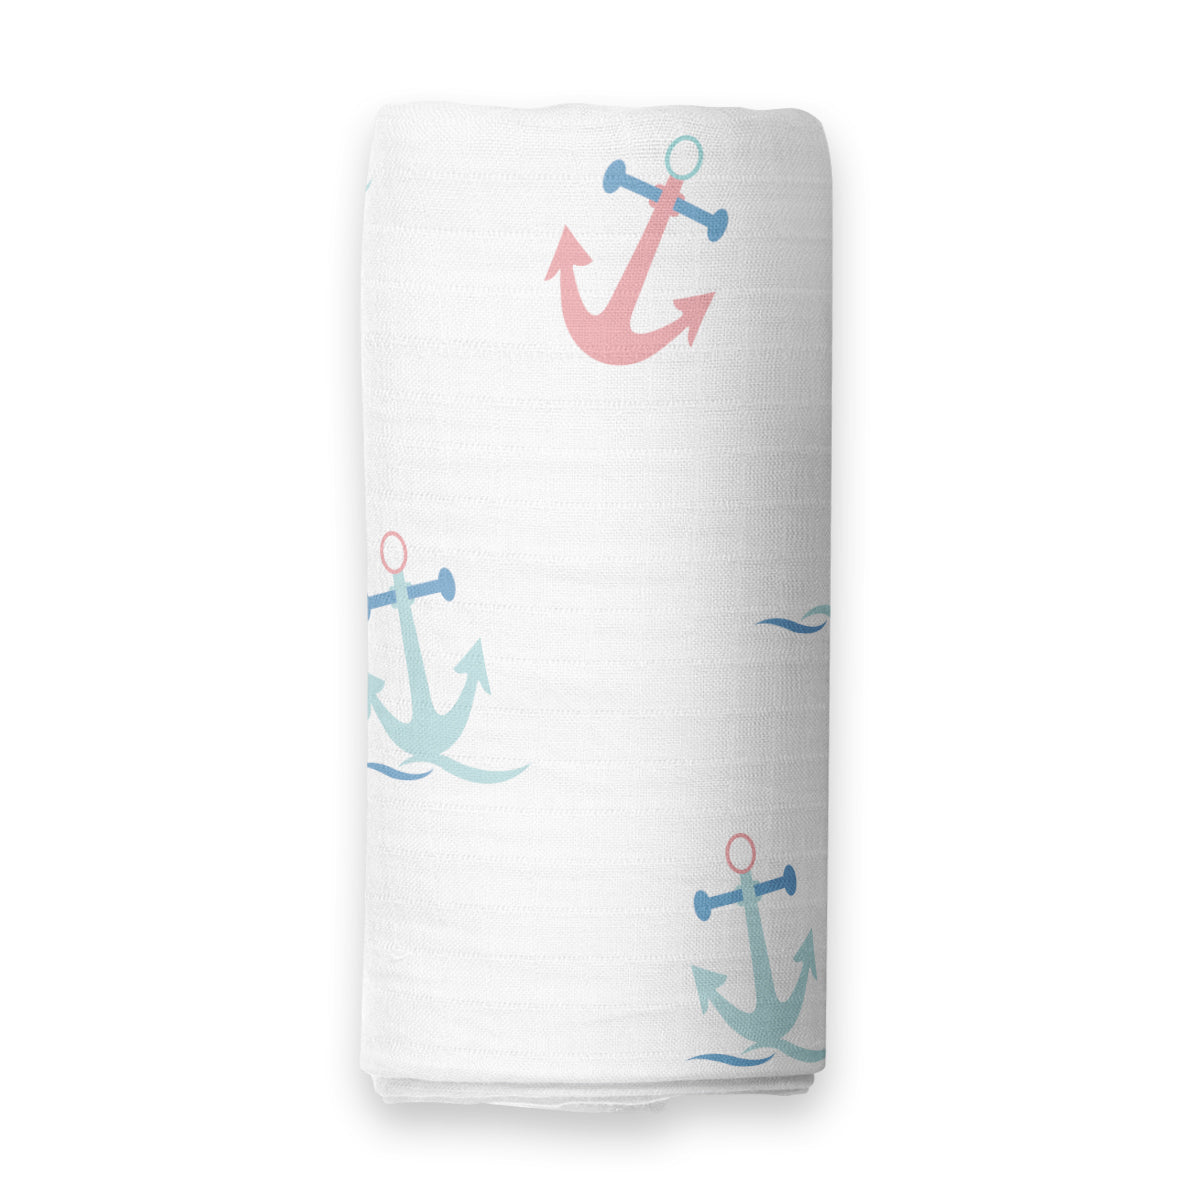 The White Cradle 100% Organic Cotton Baby Swaddle Wrap - Anchor